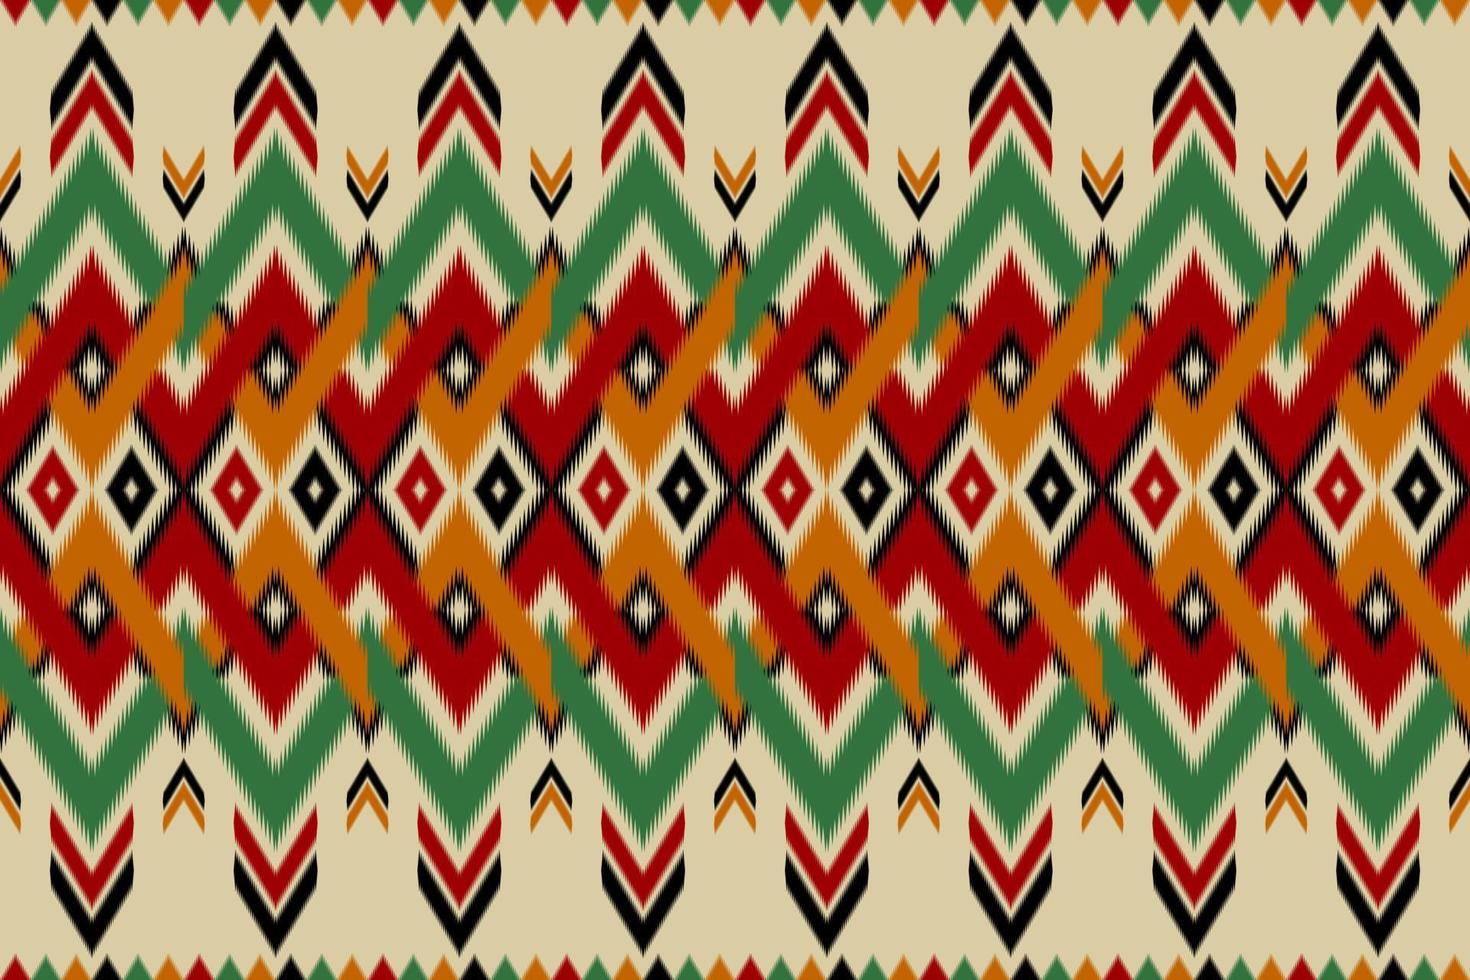 Oriental ikat native style. Geometric ethnic pattern traditional. Design for background,illustration,texture,fabric,batik,clothing,wrapping,wallpaper,carpet,embroidery vector